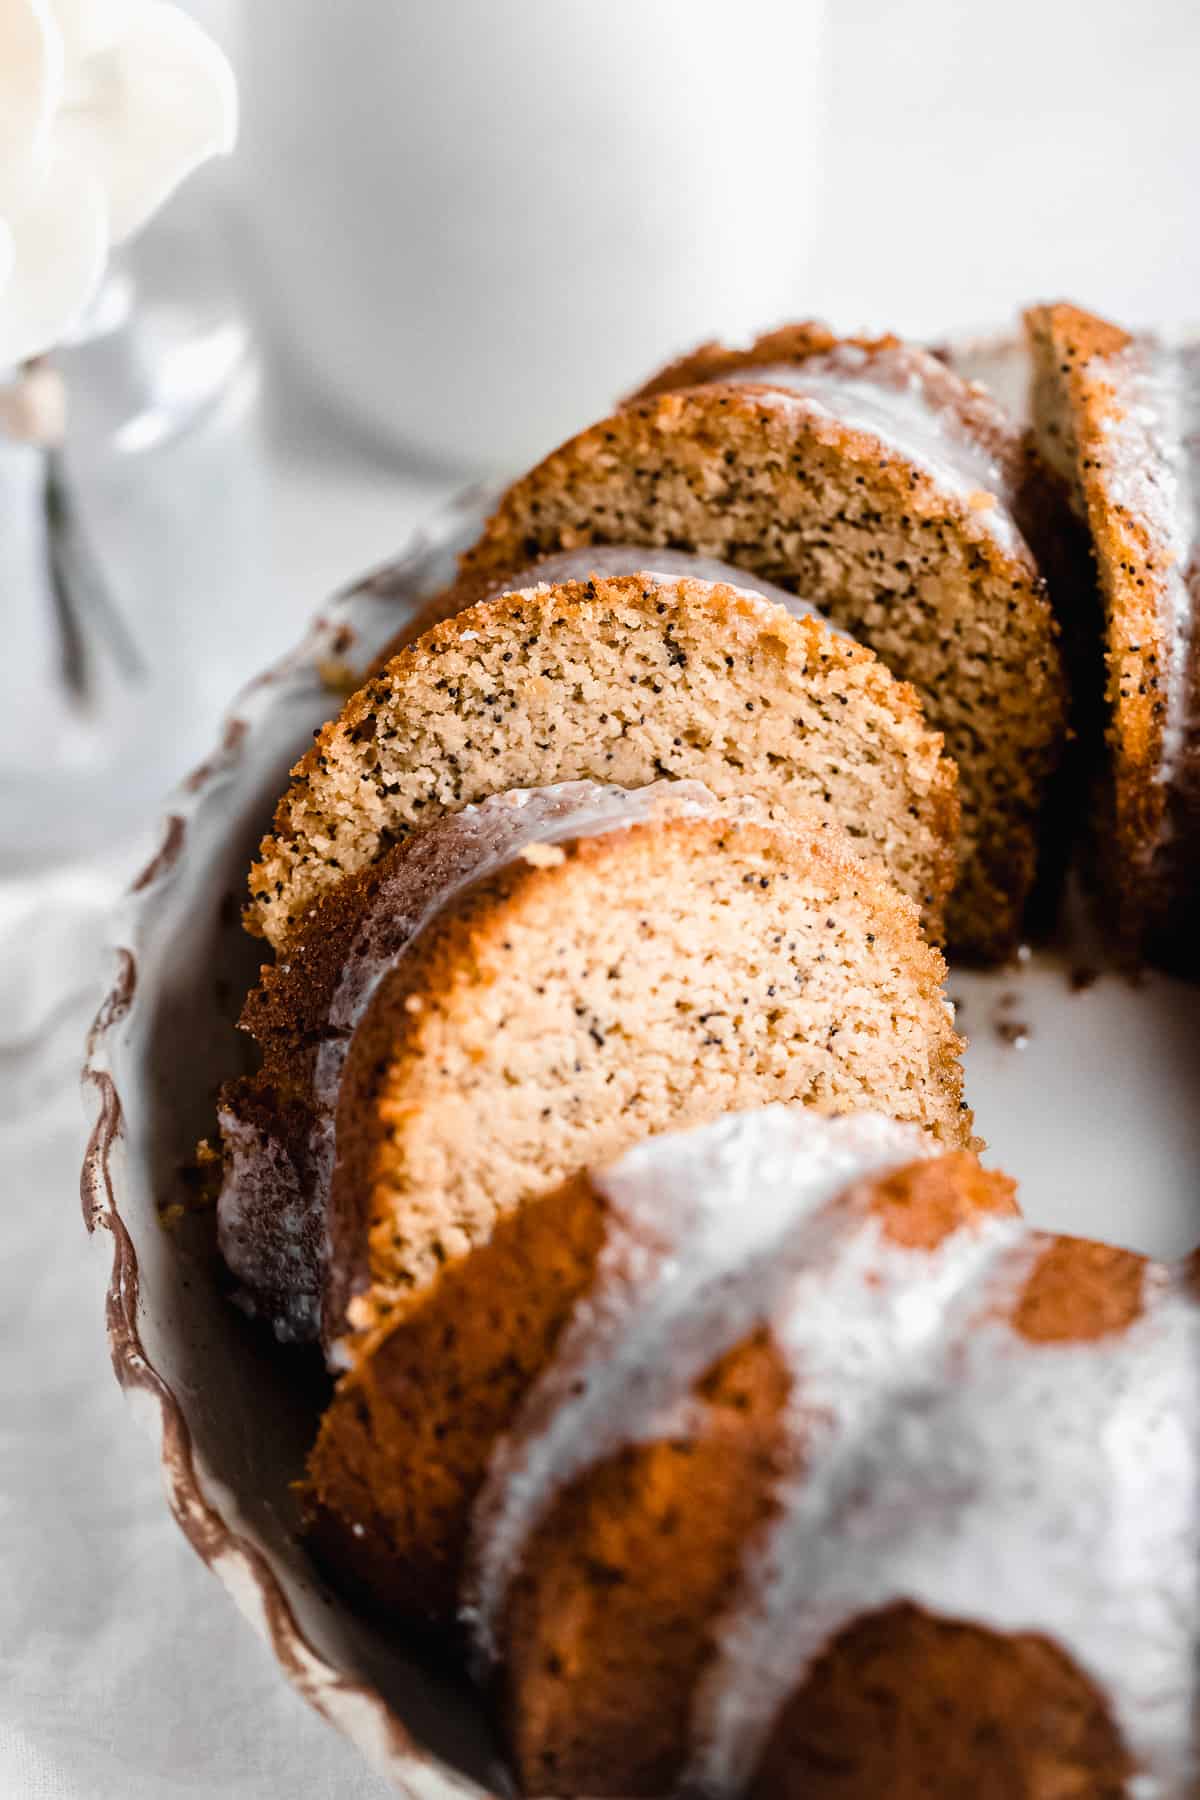 Closeup photo of half of the Citrus-y Gluten Free Lemon Poppy Seed Bundt Cake sliced and sitting on a cake plate.